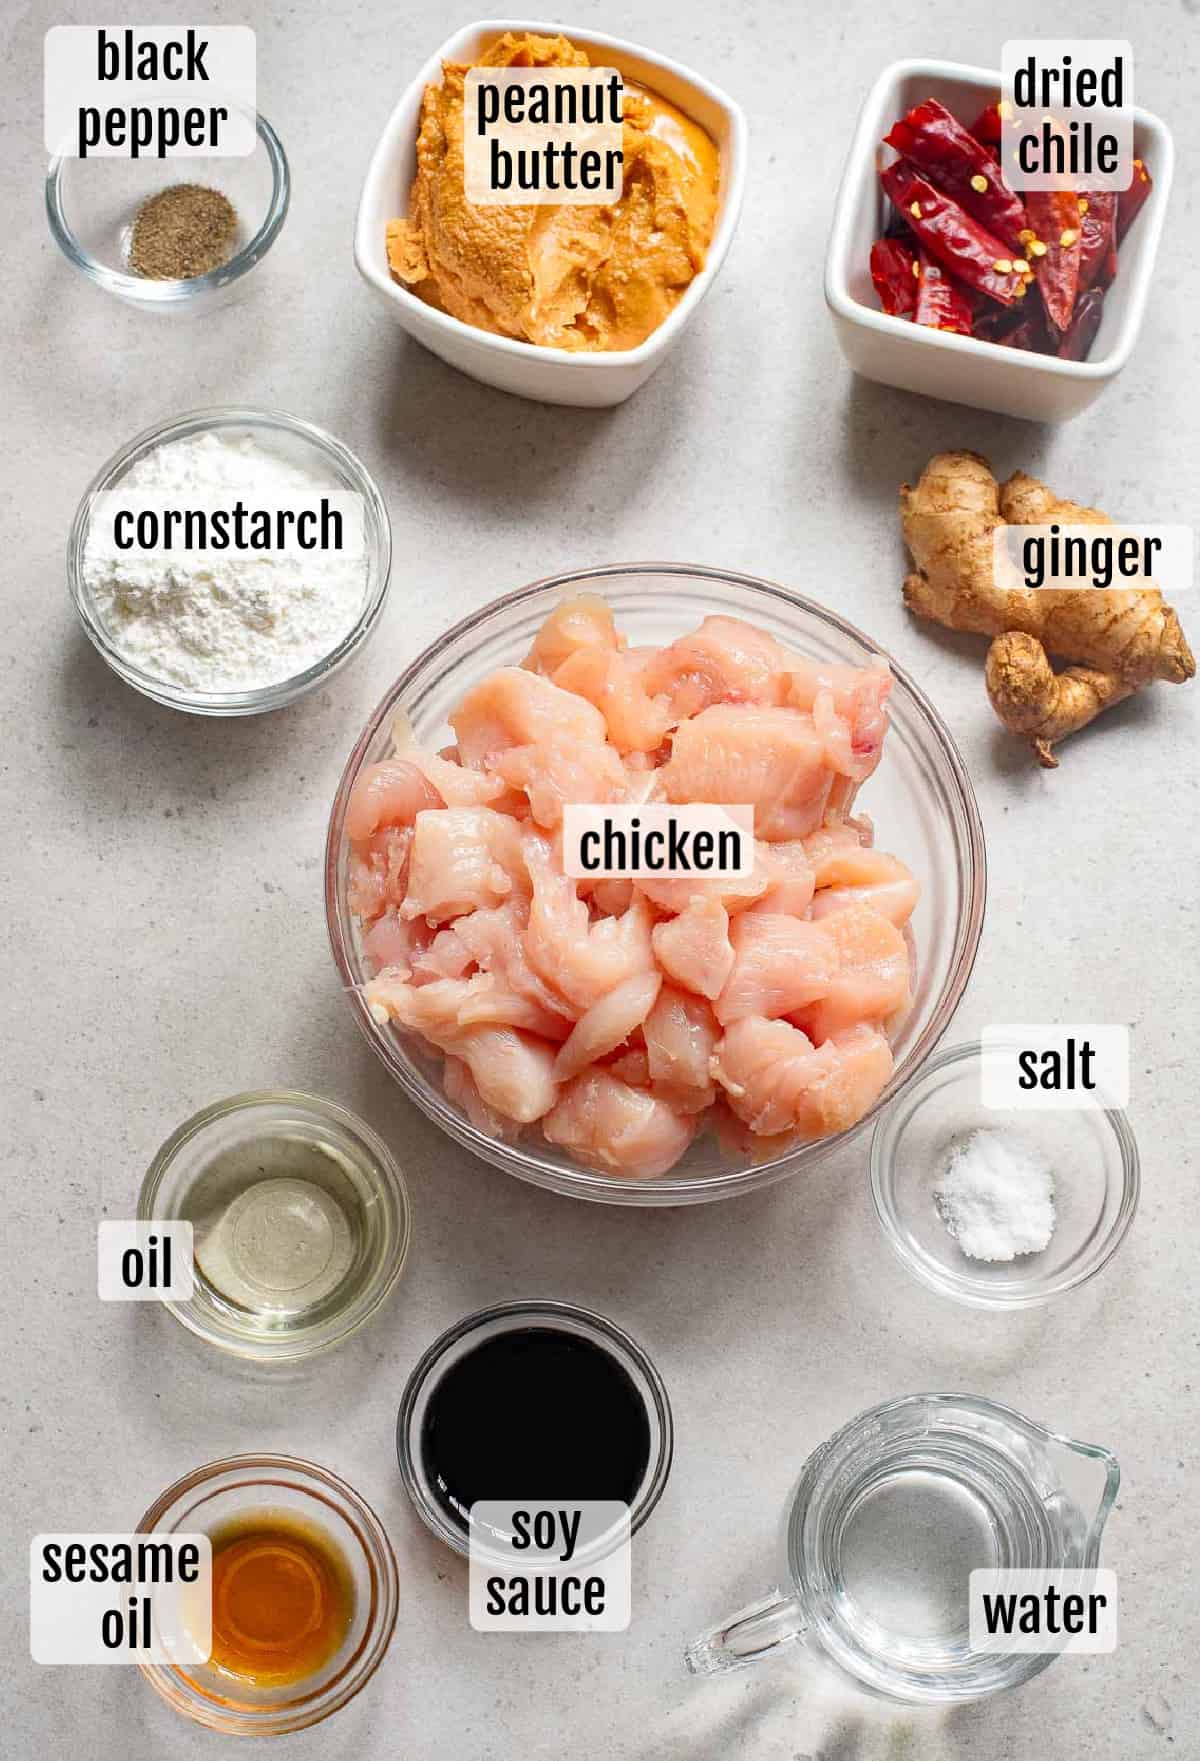 Ingredients for an asian-style chicken dish laid out on a table, labeled individually.